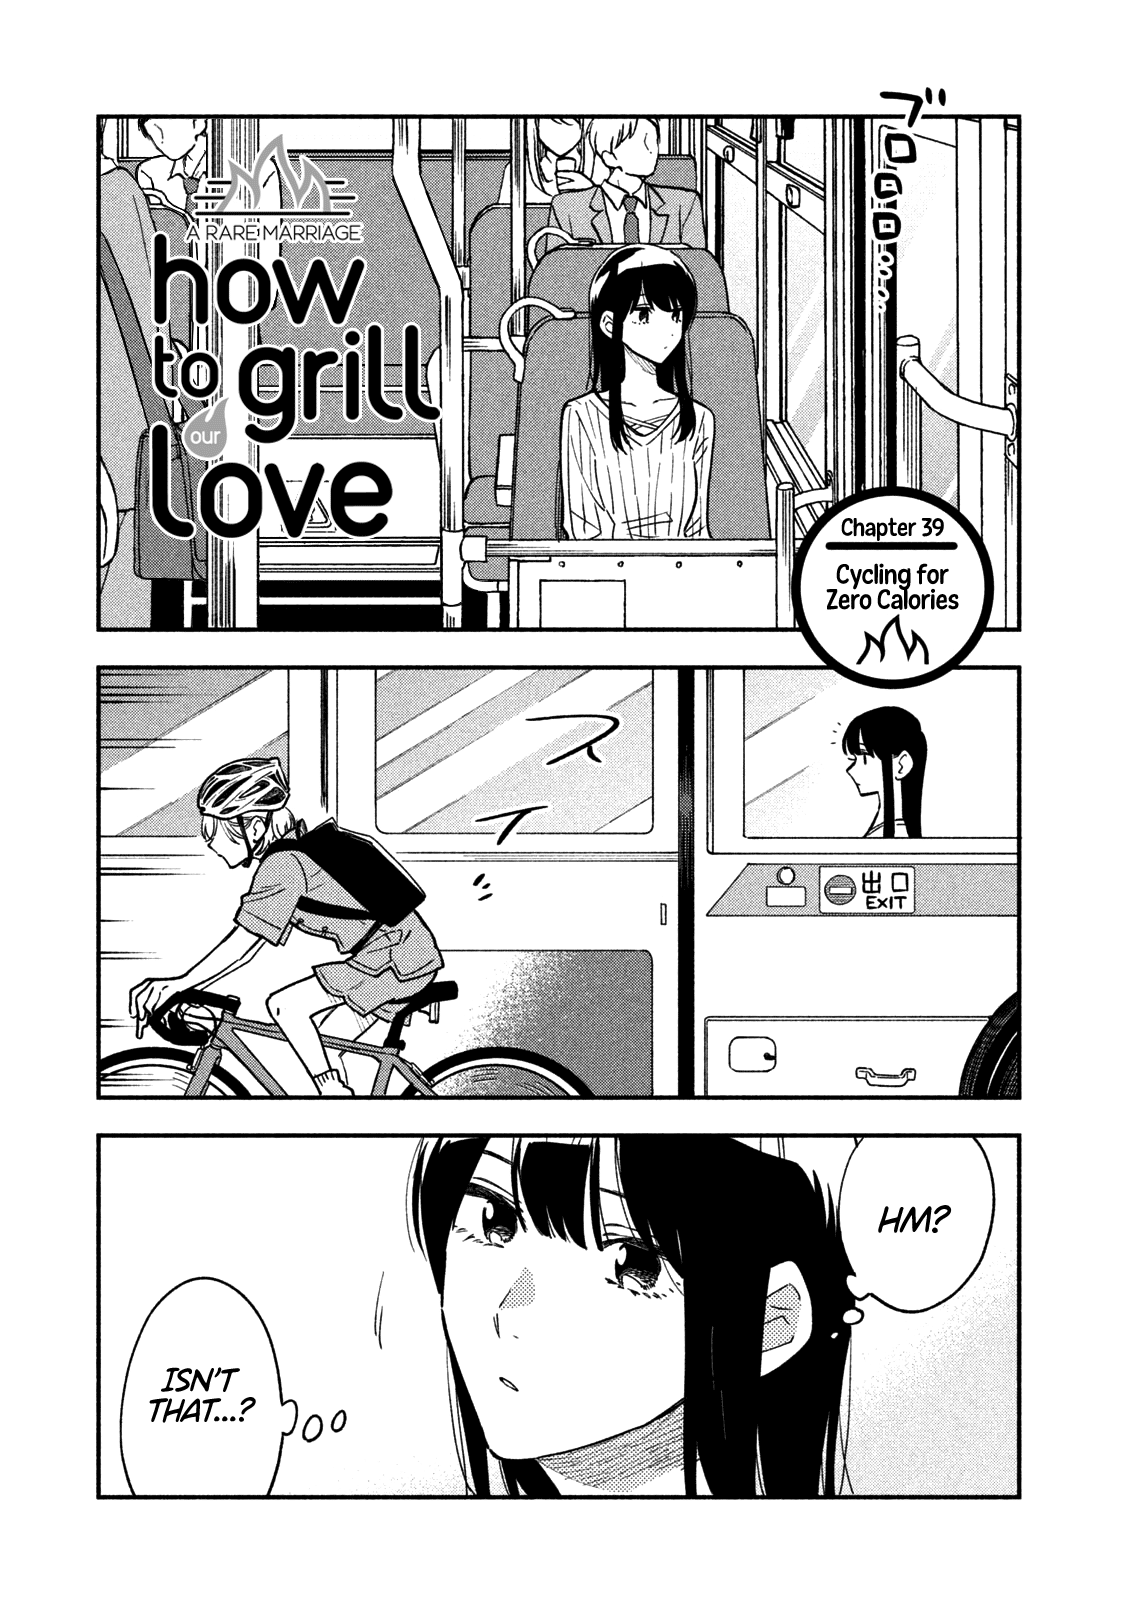 A Rare Marriage: How To Grill Our Love Chapter 39 #2